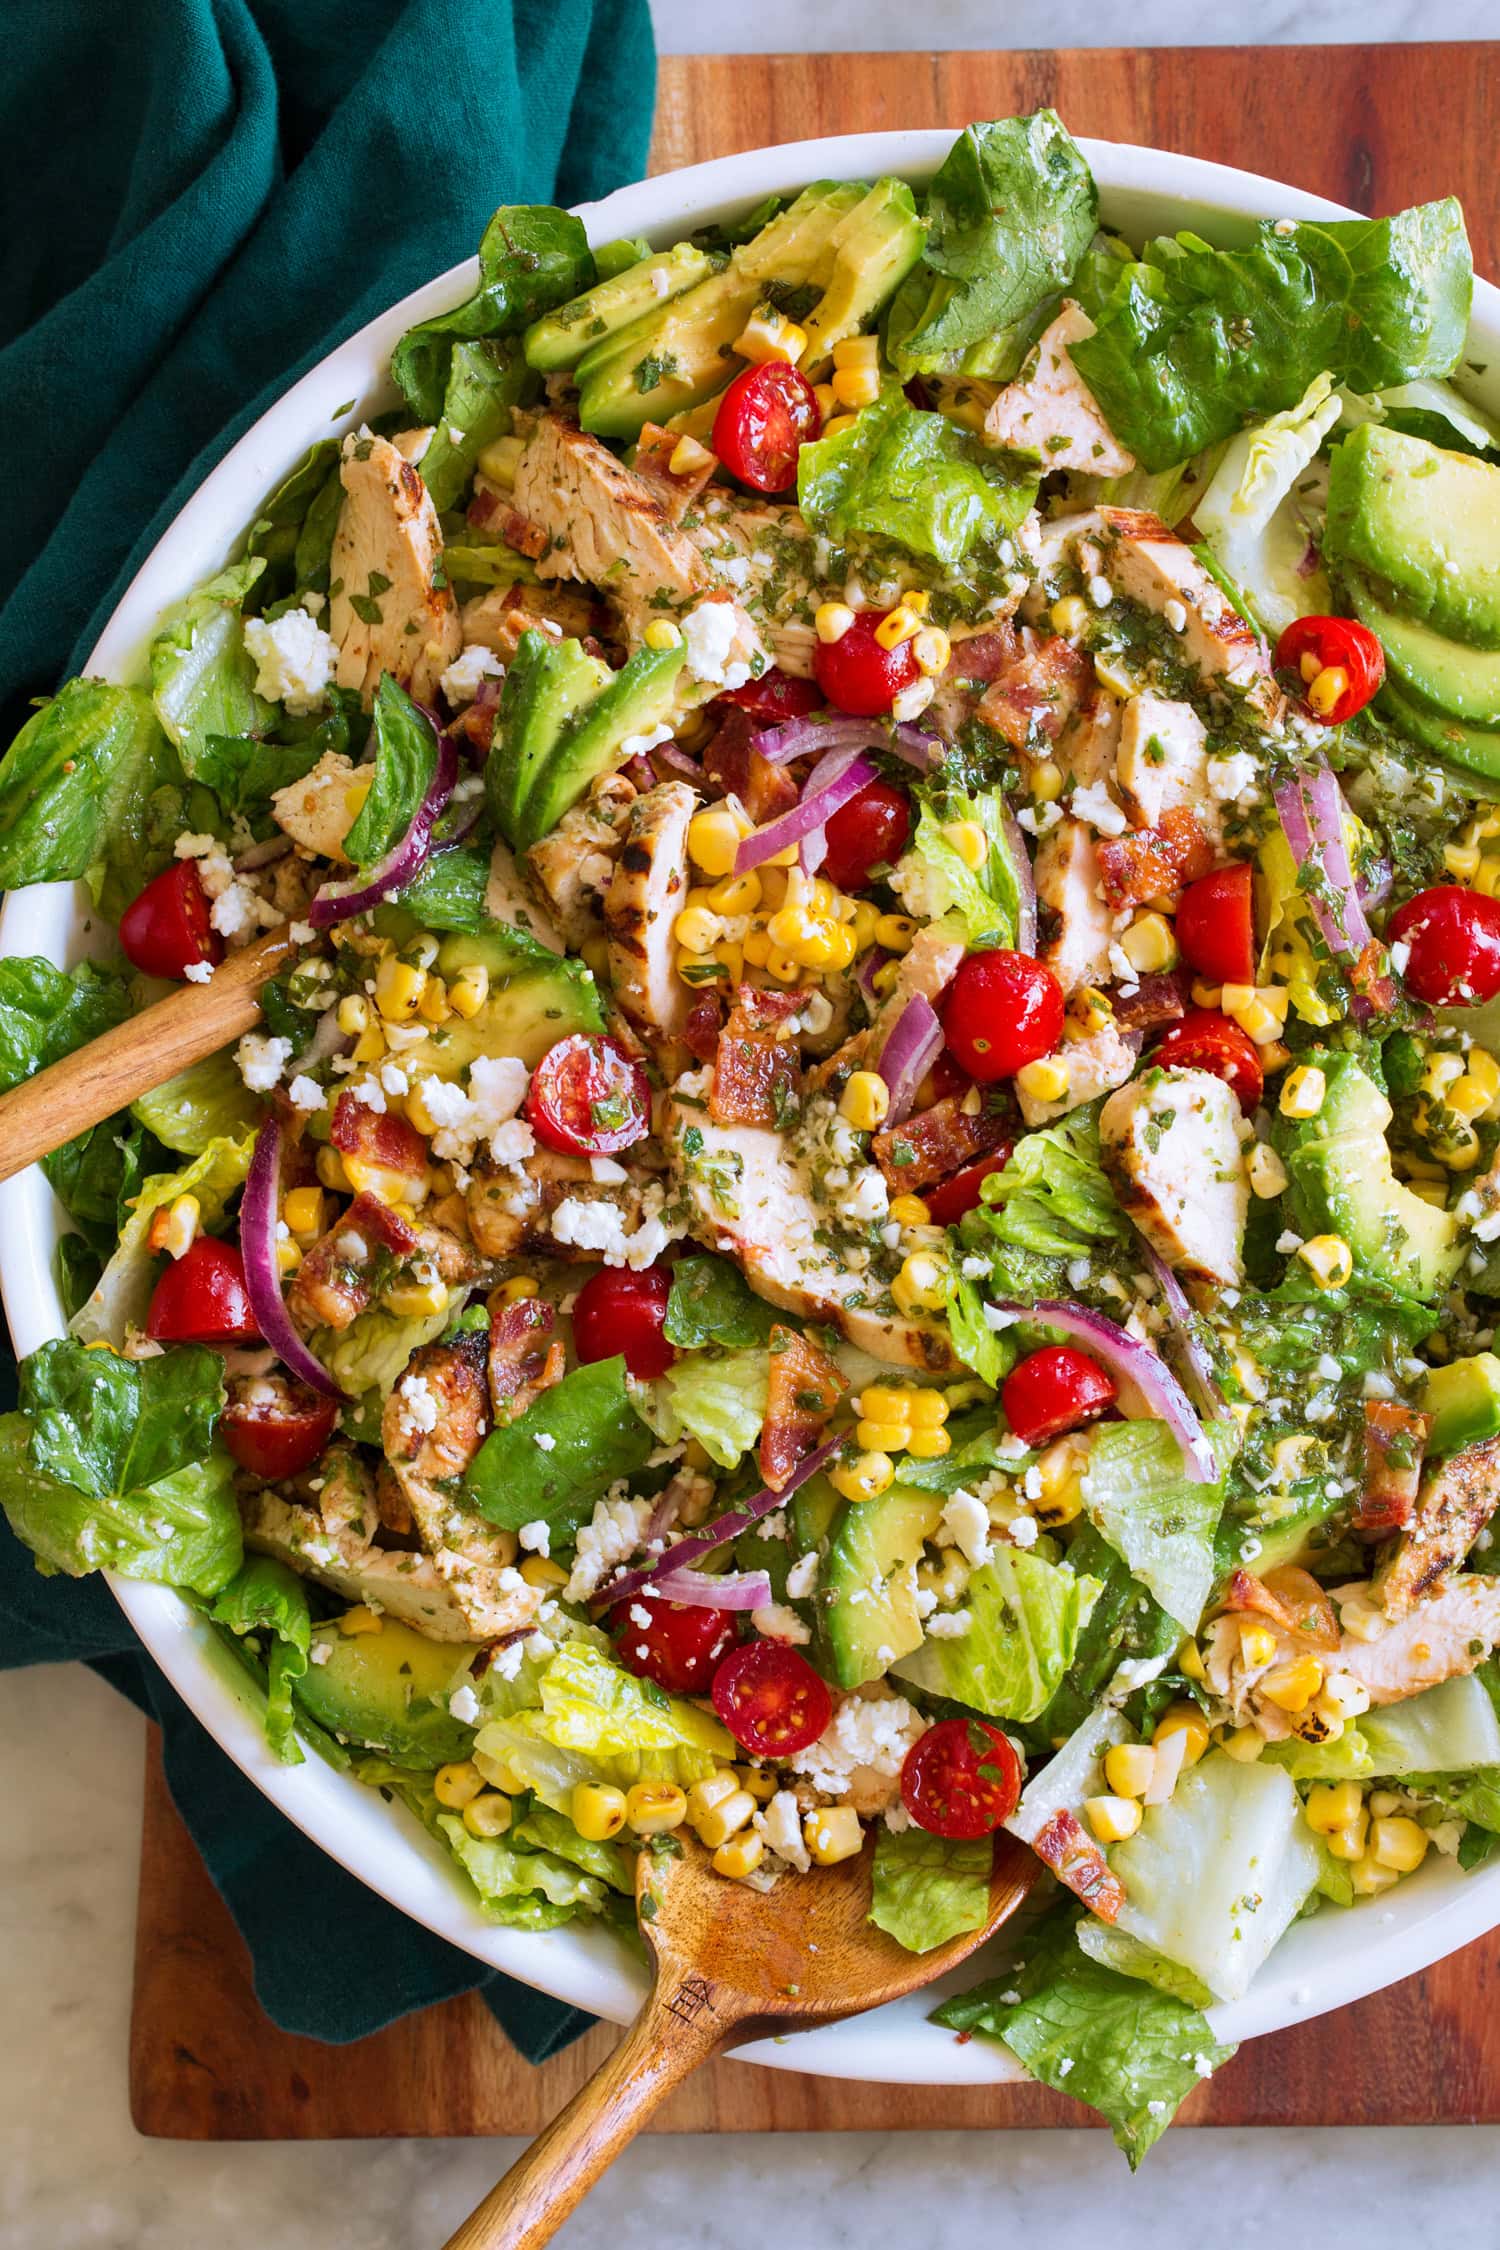 Tossed salad with grilled chicken, tomatoes, corn, avocado and romaine lettuce.